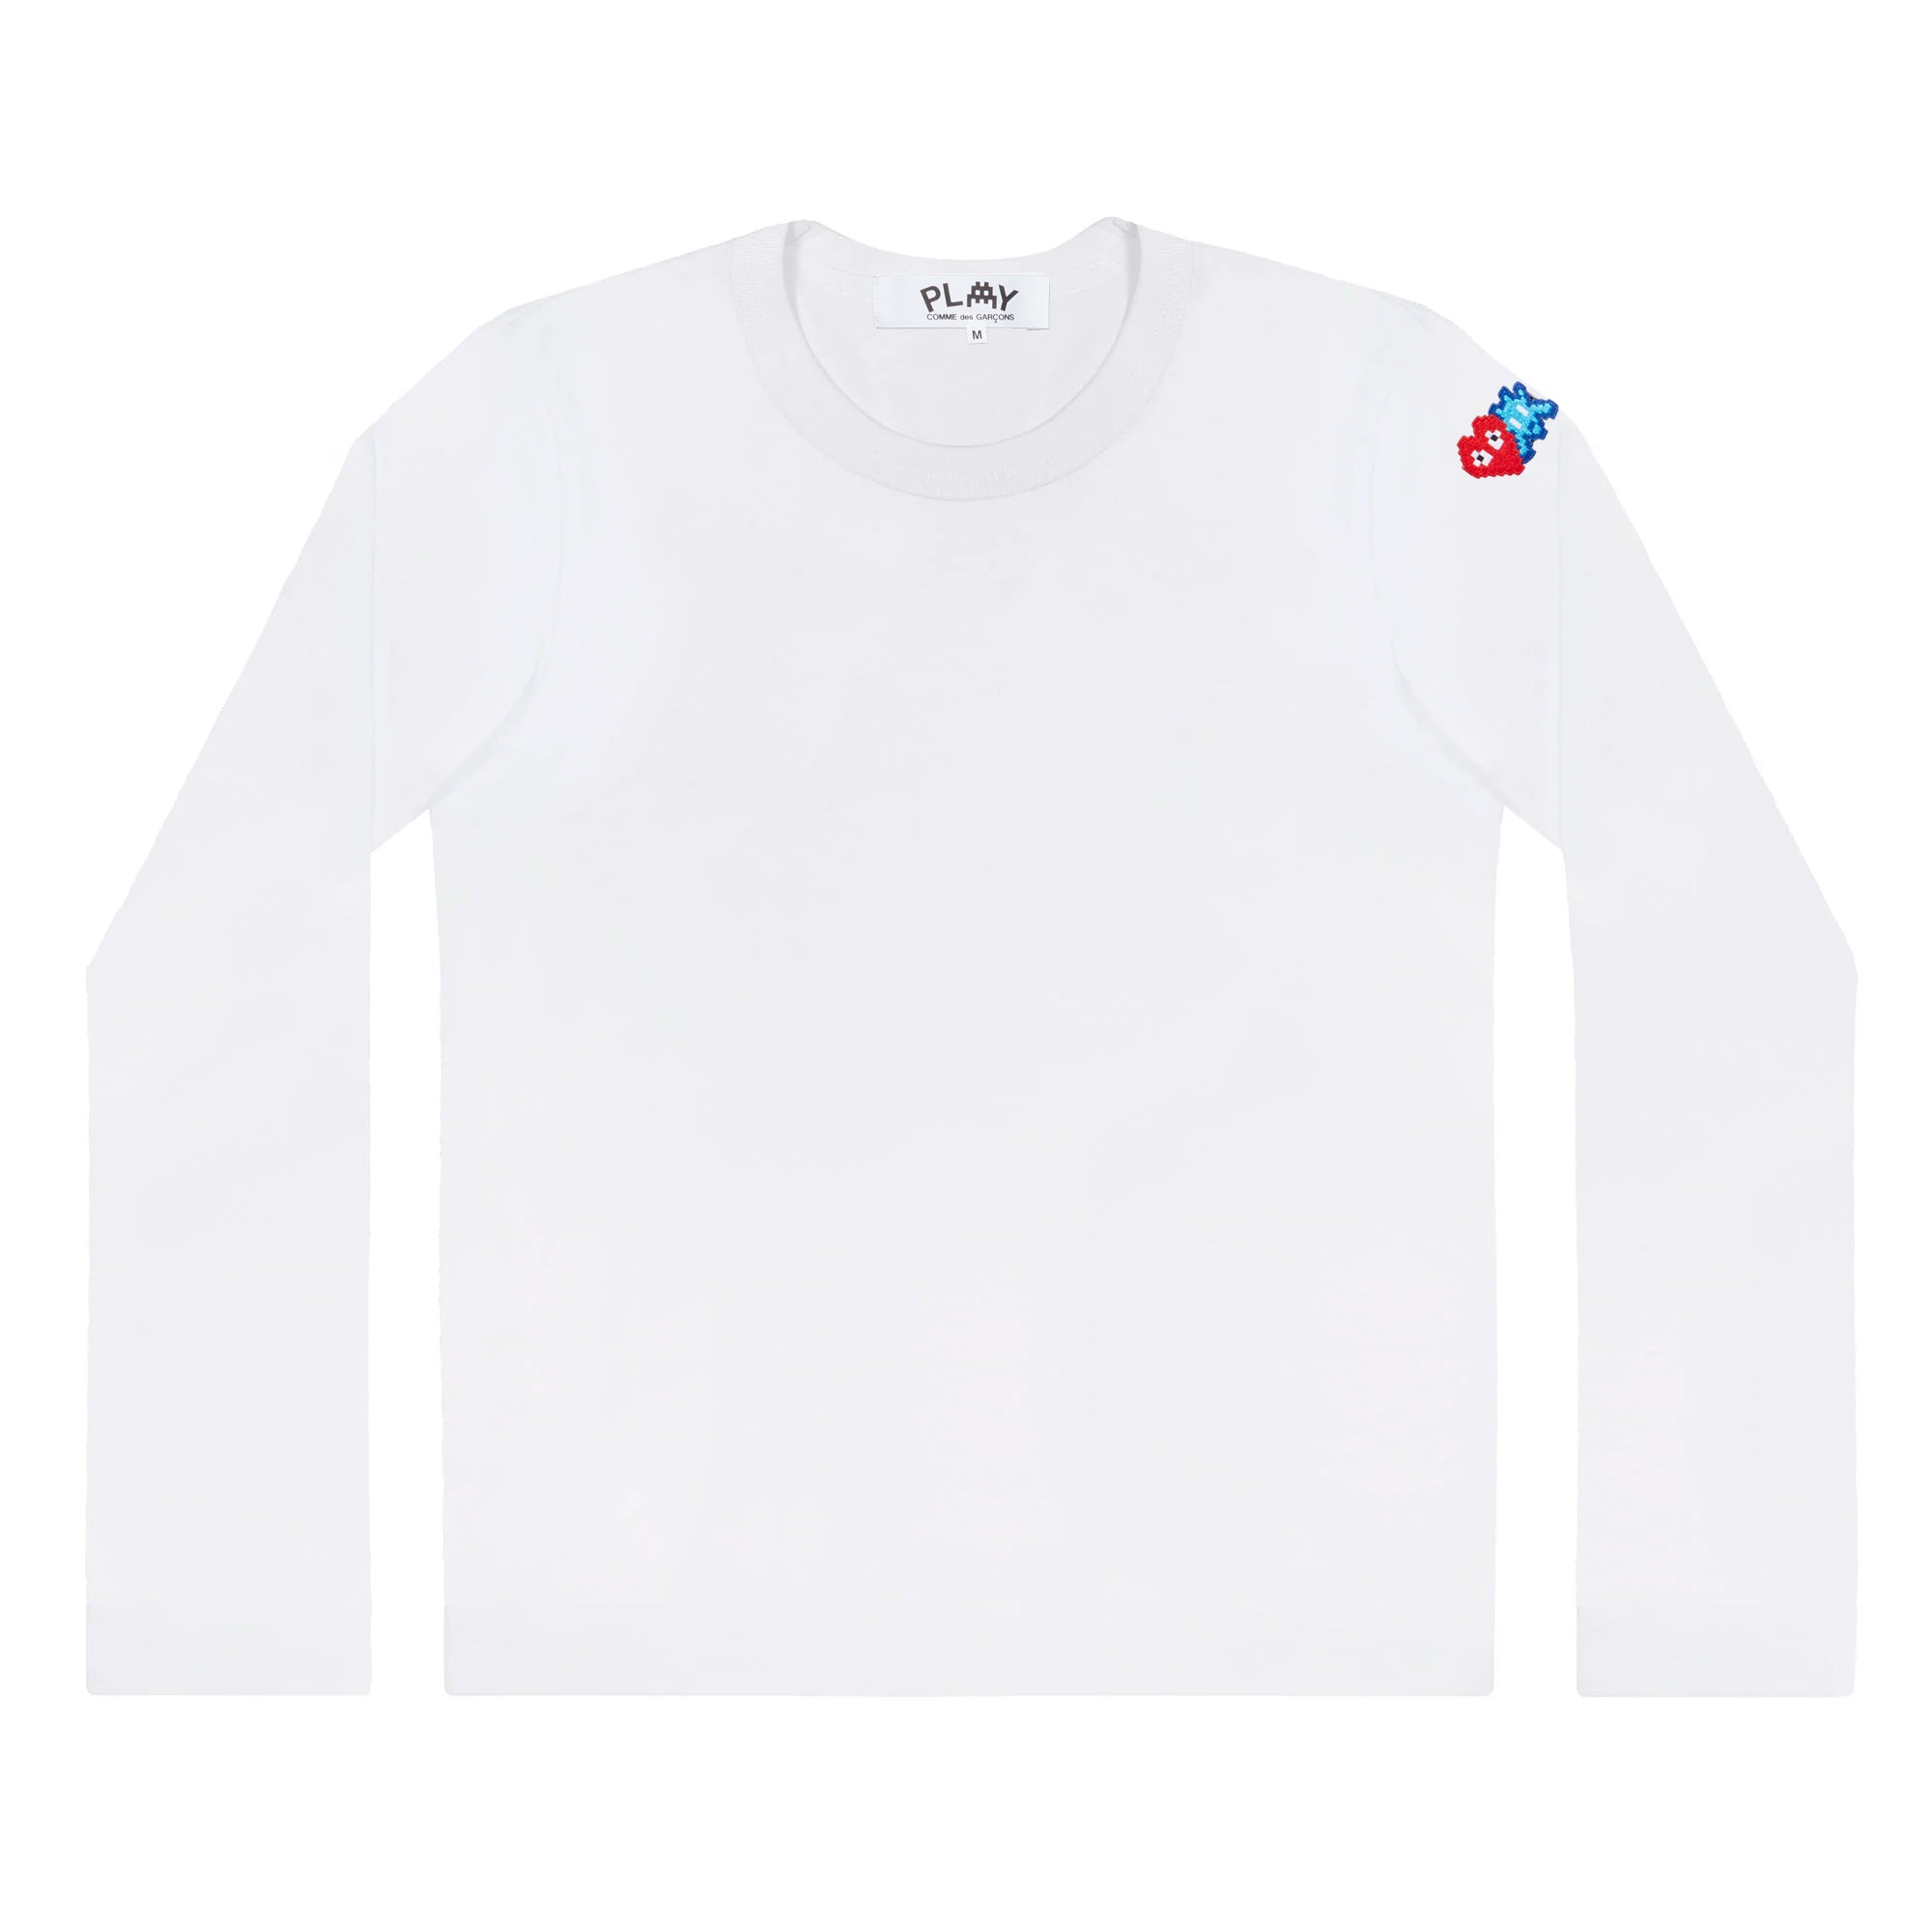 PLAY L/S Invader T-Shirt Red and Blue Sleeve Emblem (White)